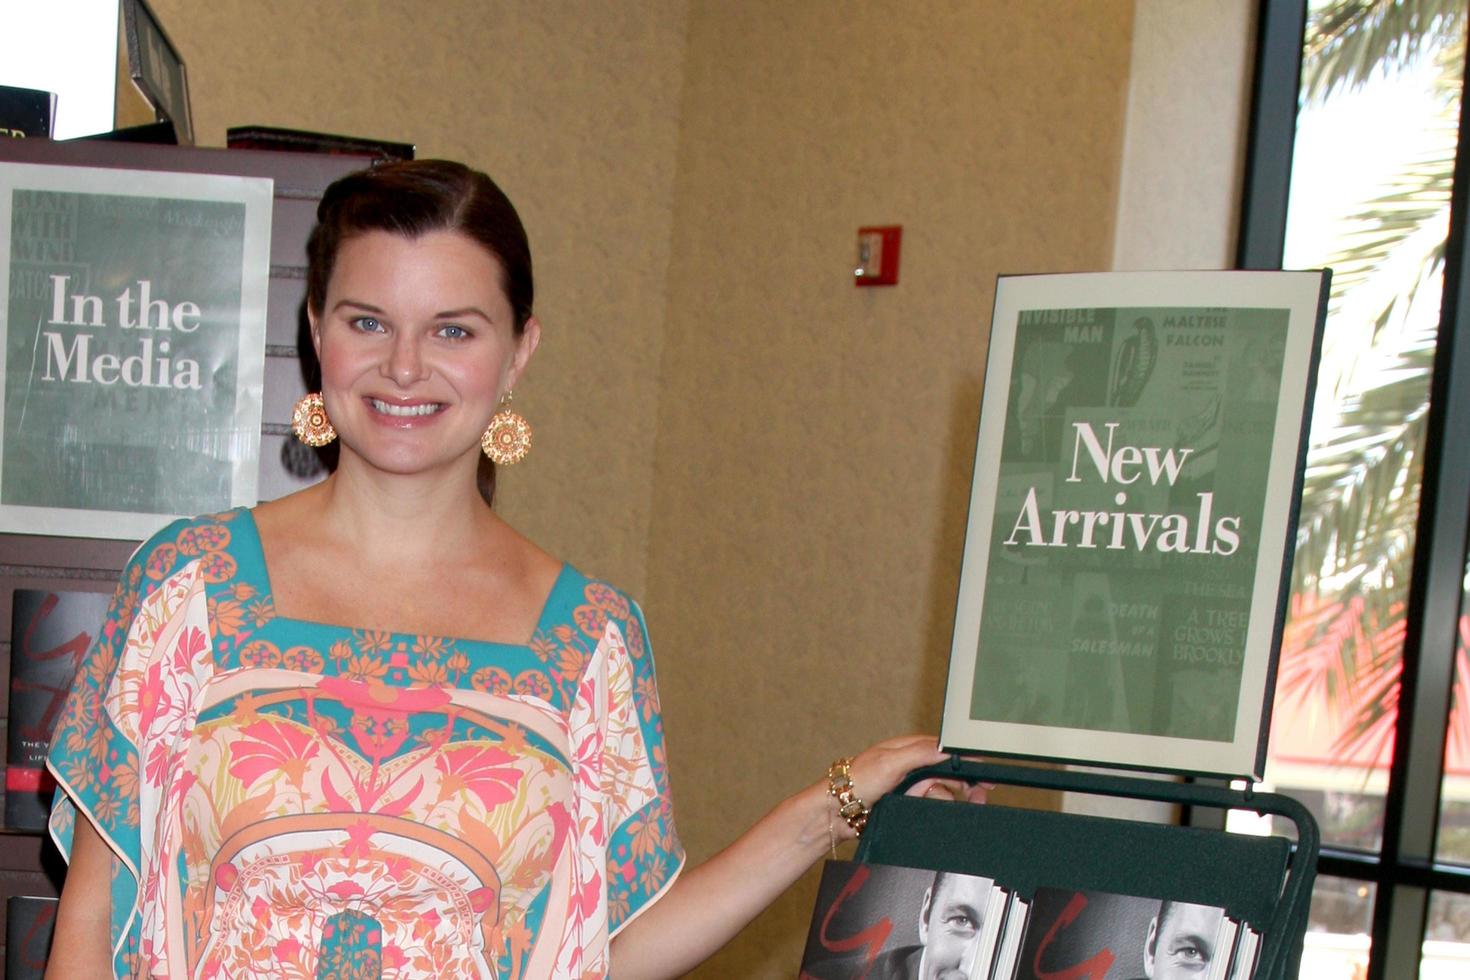 LOS ANGELES, JUL 8 - Heather Tom at the William J. Bell Biography Booksigning at Barnes and Noble on July 8, 2012 in Costa Mesa, CA photo